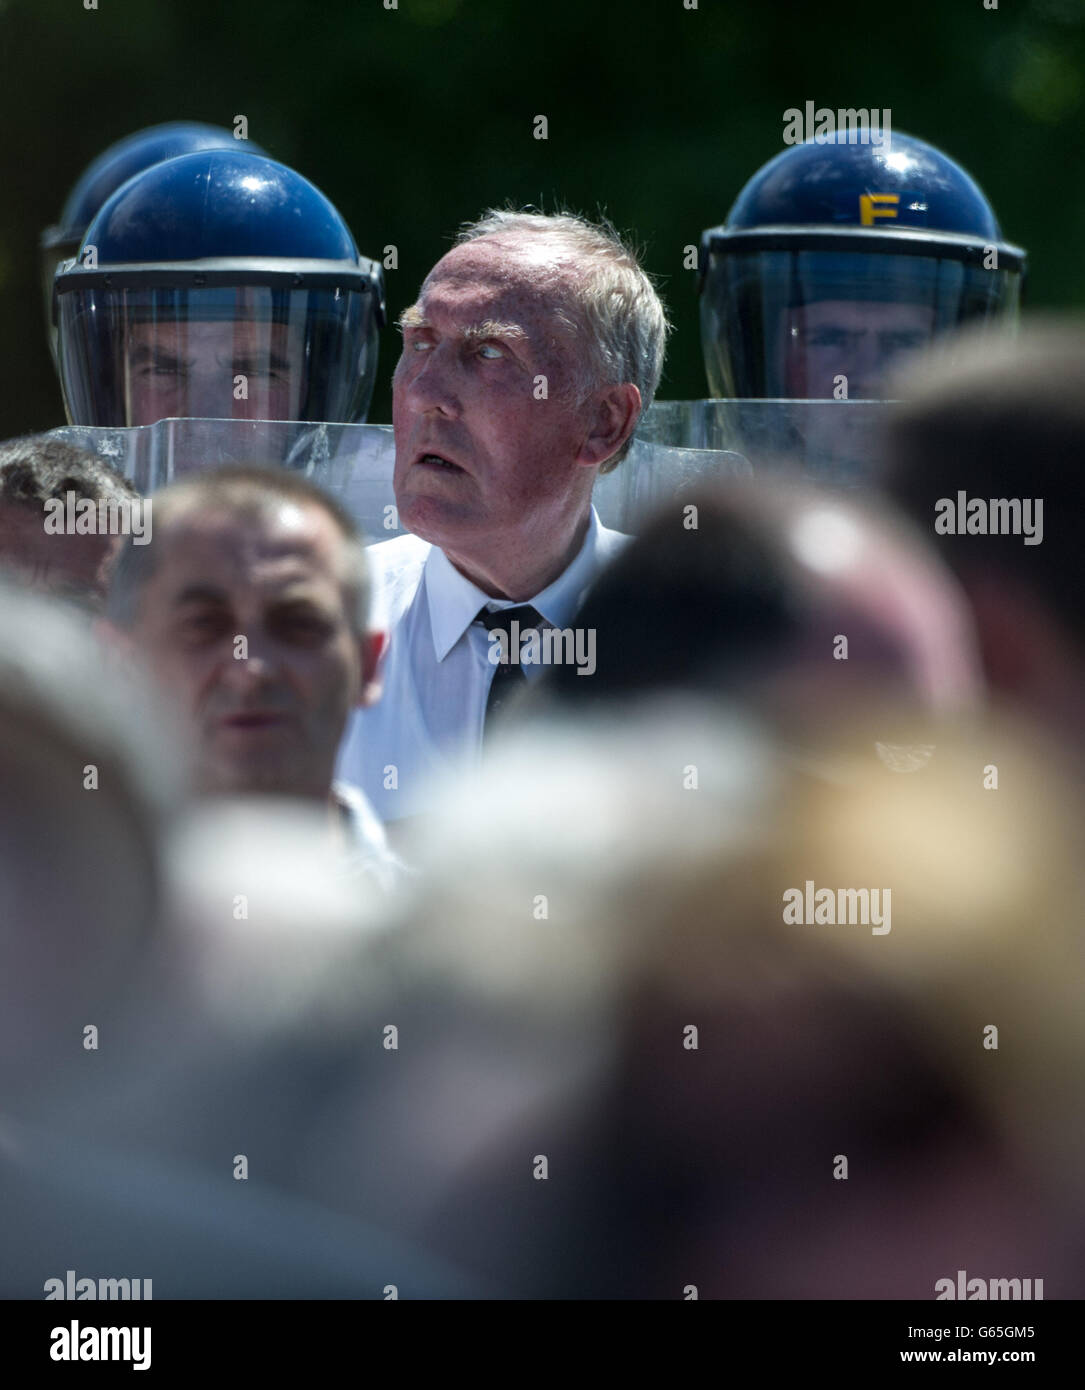 A member of the colour party surrounded by Garda at the burial of former Republican Sinn Fein leader Ruairi O Bradaigh at St. Coman's Cemetery, Roscommon. PRESS ASSOCIATION Photo. Picture date: Saturday June 8, 2013. Photo credit should read: Barry Cronin/PA Wire Stock Photo